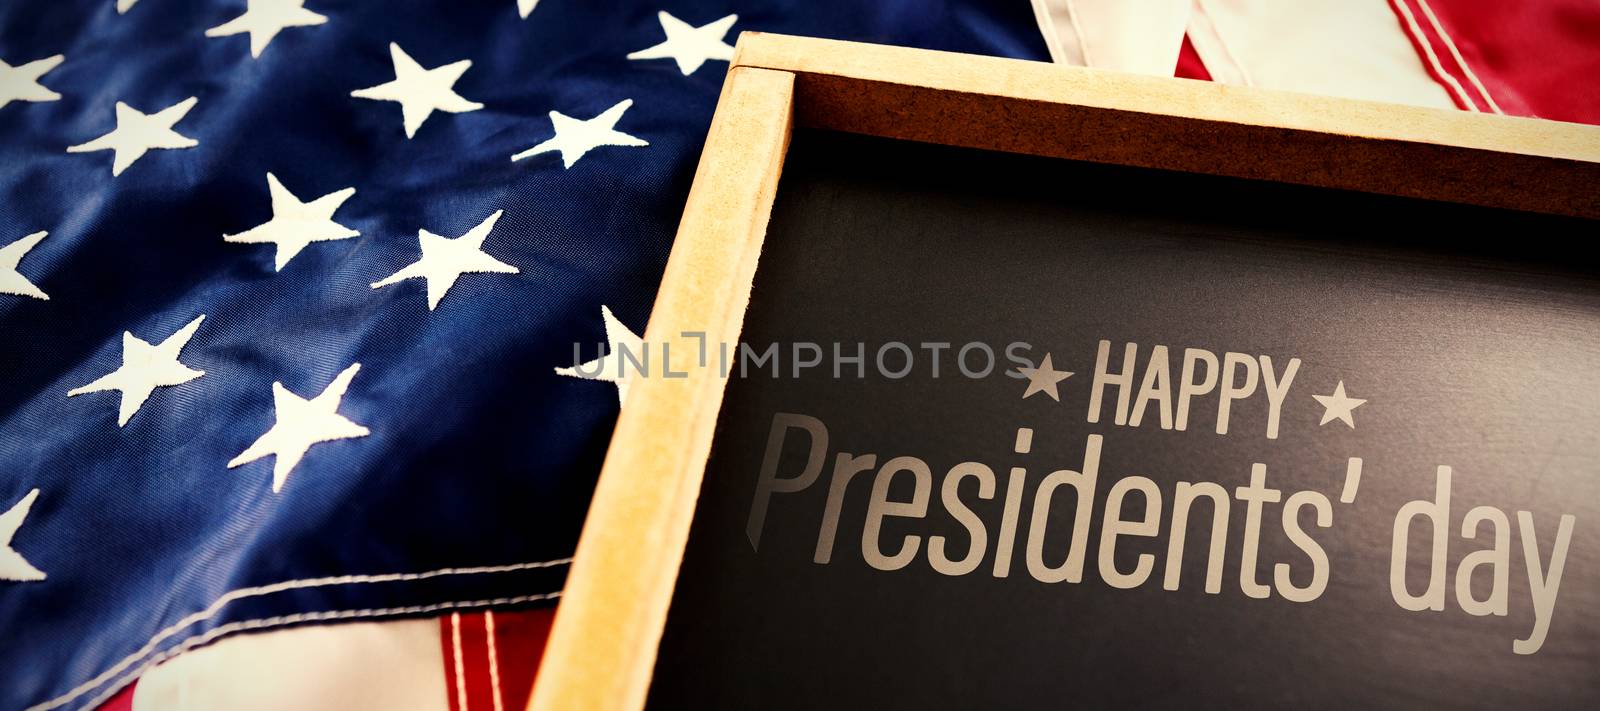 Happy presidents day against american flag and slate on wooden table